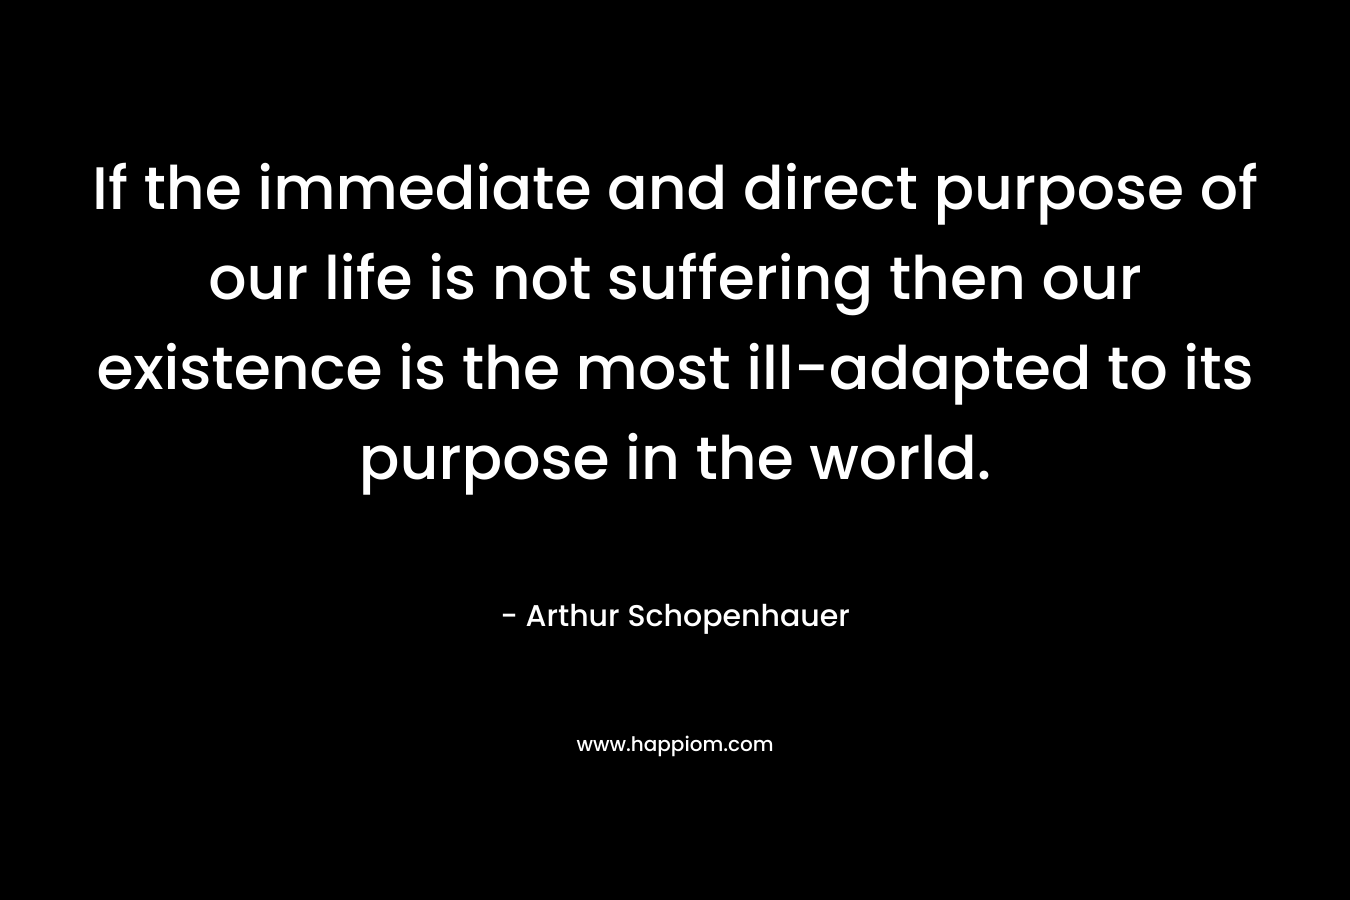 If the immediate and direct purpose of our life is not suffering then our existence is the most ill-adapted to its purpose in the world.